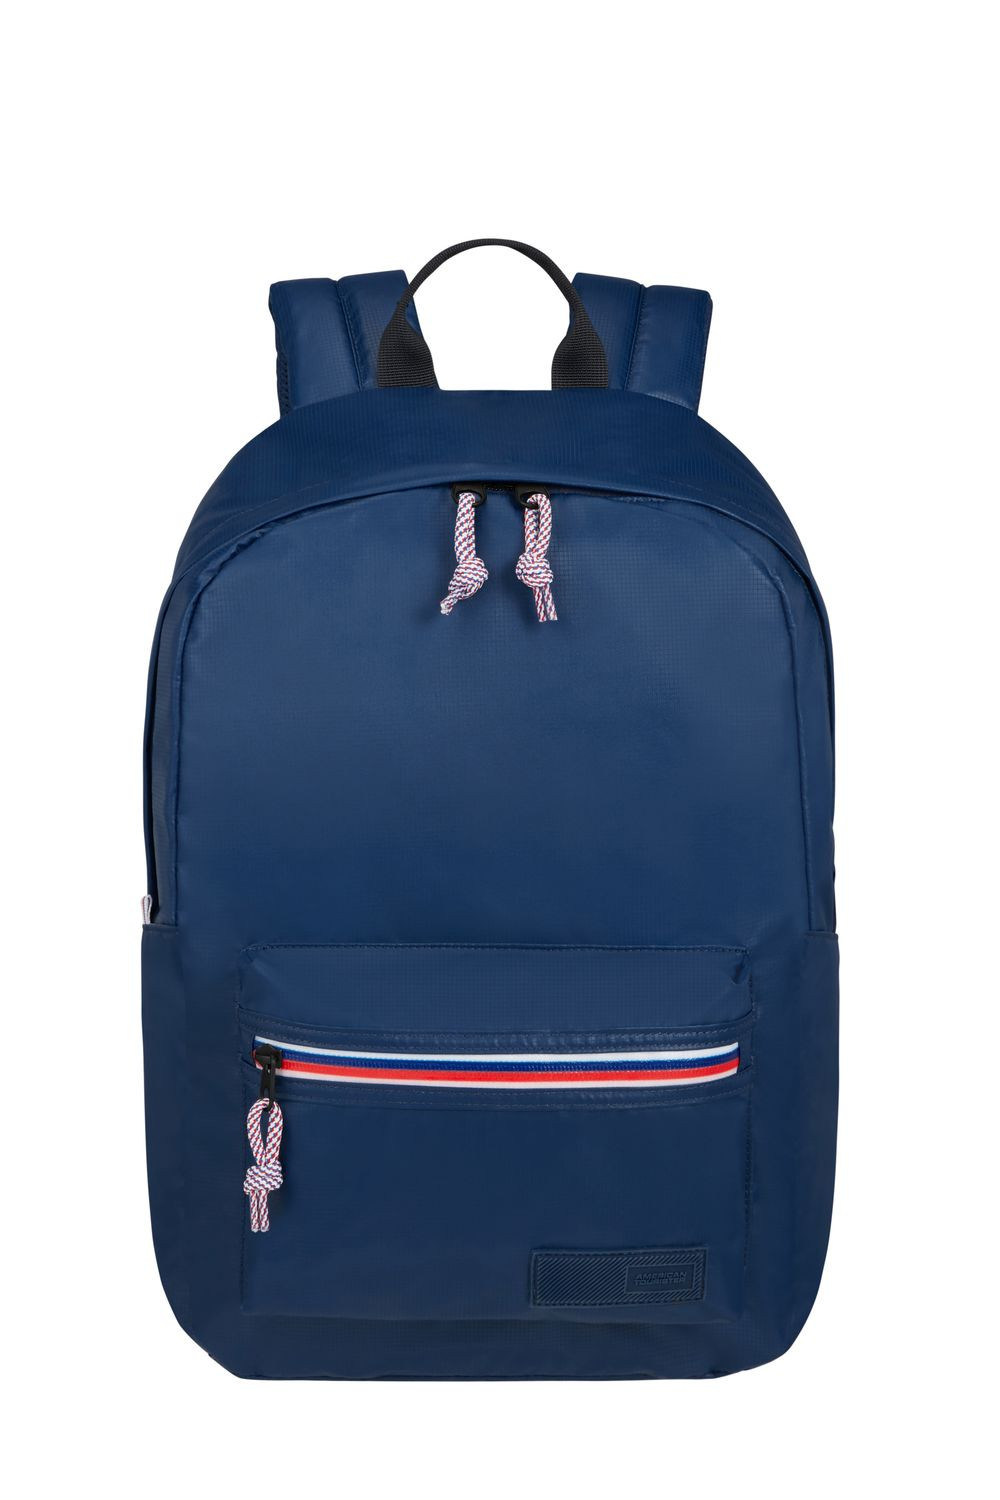 Backpack Navy - AMERICAN TOURISTER